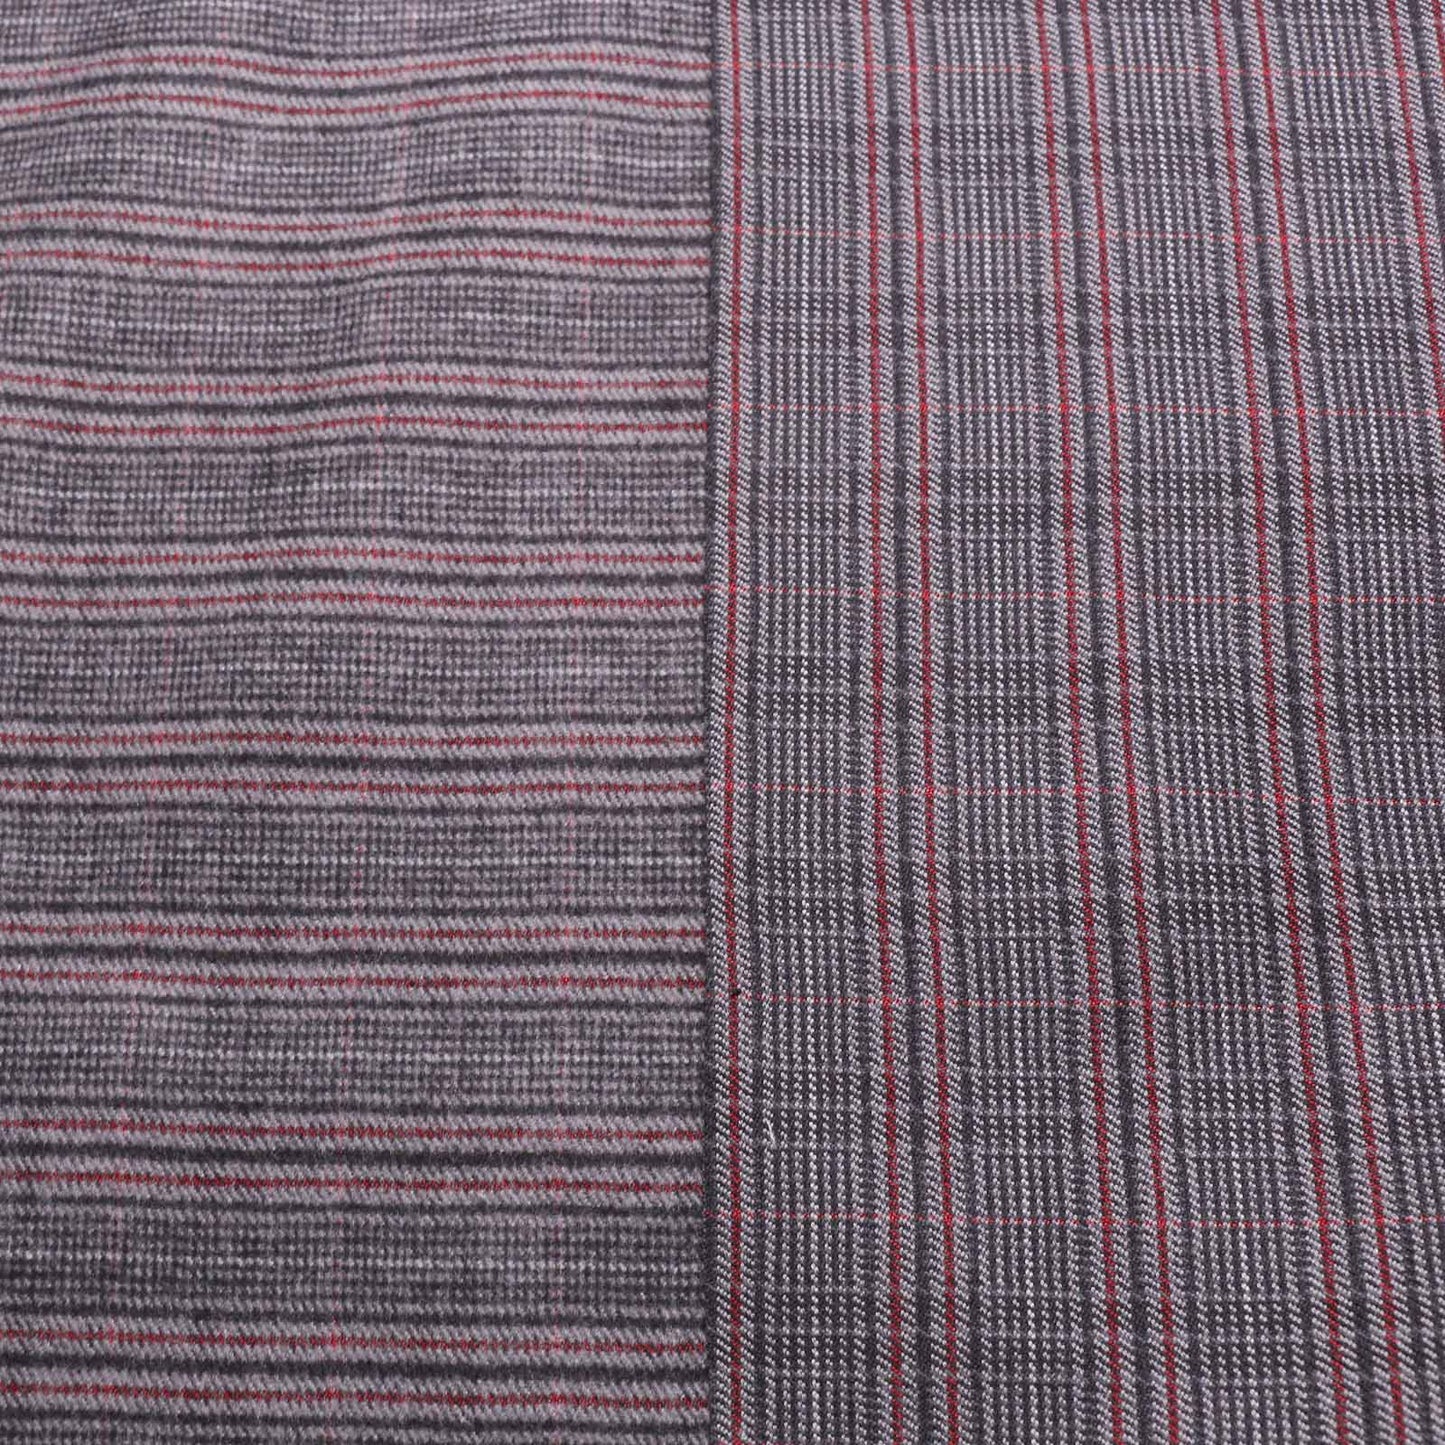 folded grey red and black check pattern brushed cotton stretchy suiting fabric